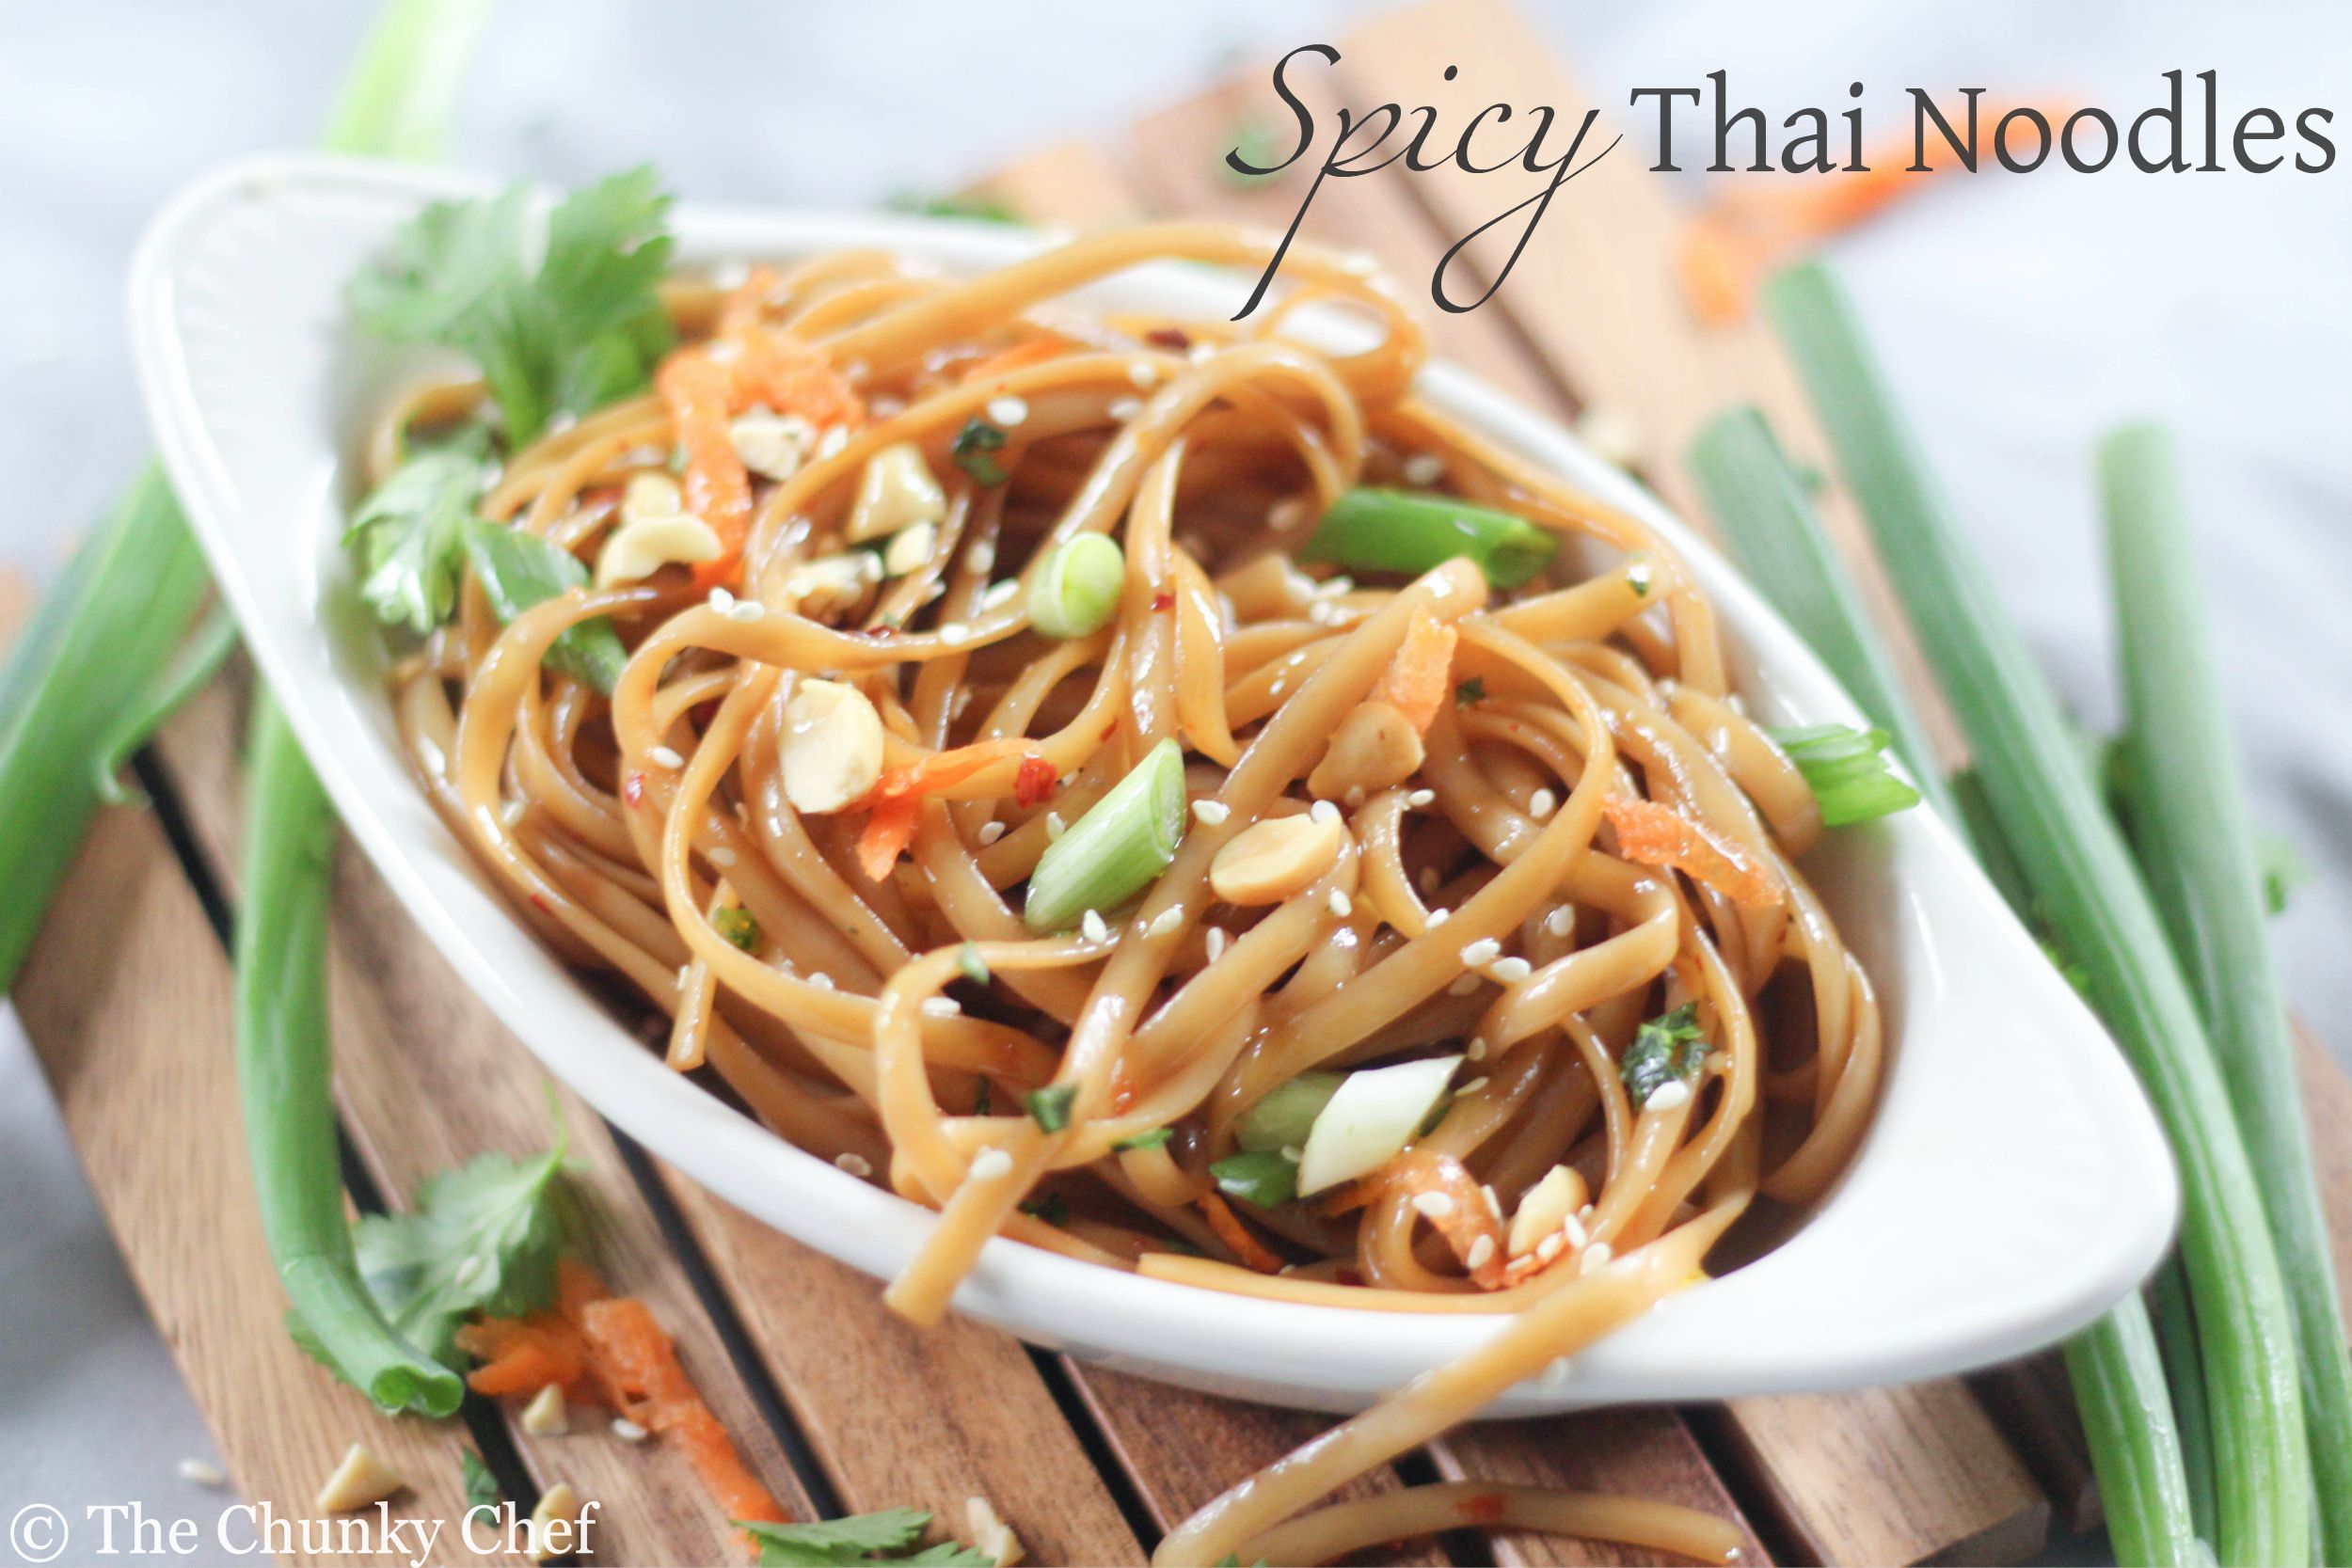 20 Minute Spicy Thai Noodles The Chunky Chef,Aglaonema Pictum Tricolor